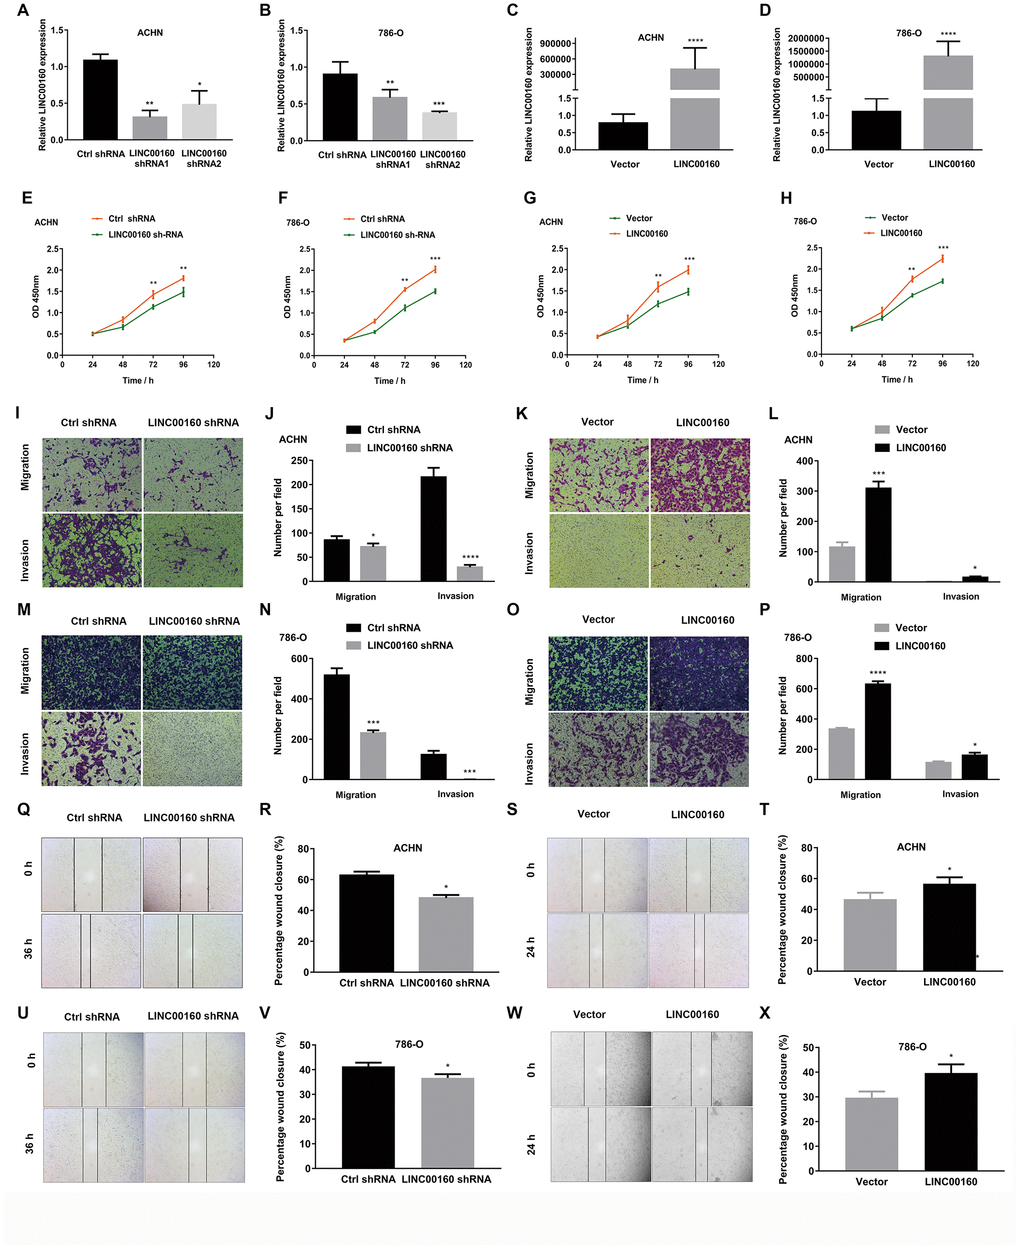 LINC00160 promotes proliferation, migration and invasion of RCC. (A–D) LINC00160 expression was verified after transfection in ACHN and 786-O. (E–H) Proliferation assays revealed attenuated capabilities of ACHN (E) and 786-O (F) after knocking down LINC00160, and enhanced capabilities of ACHN (G) and 786-O (H) after overexpressing LINC00160. (I–L) Migration and invasion abilities of ACHN were weakened after knocking down LINC00160, and elevated after overexpressing LINC00160. (M–P) Migration and invasion abilities of 786-O were weakened after knocking down LINC00160, and elevated after overexpressing LINC00160. (Q–T) Wound healing assays revealed impaired capabilities of ACHN after knocking down LINC00160, and promoted capabilities after overexpressing LINC00160. (U–X) Wound healing assays revealed impaired capabilities of 786-O after knocking down LINC00160, and enhanced capabilities after overexpressing LINC00160. Each experiment was performed at least three times and data was represented as mean ± SEM. *P